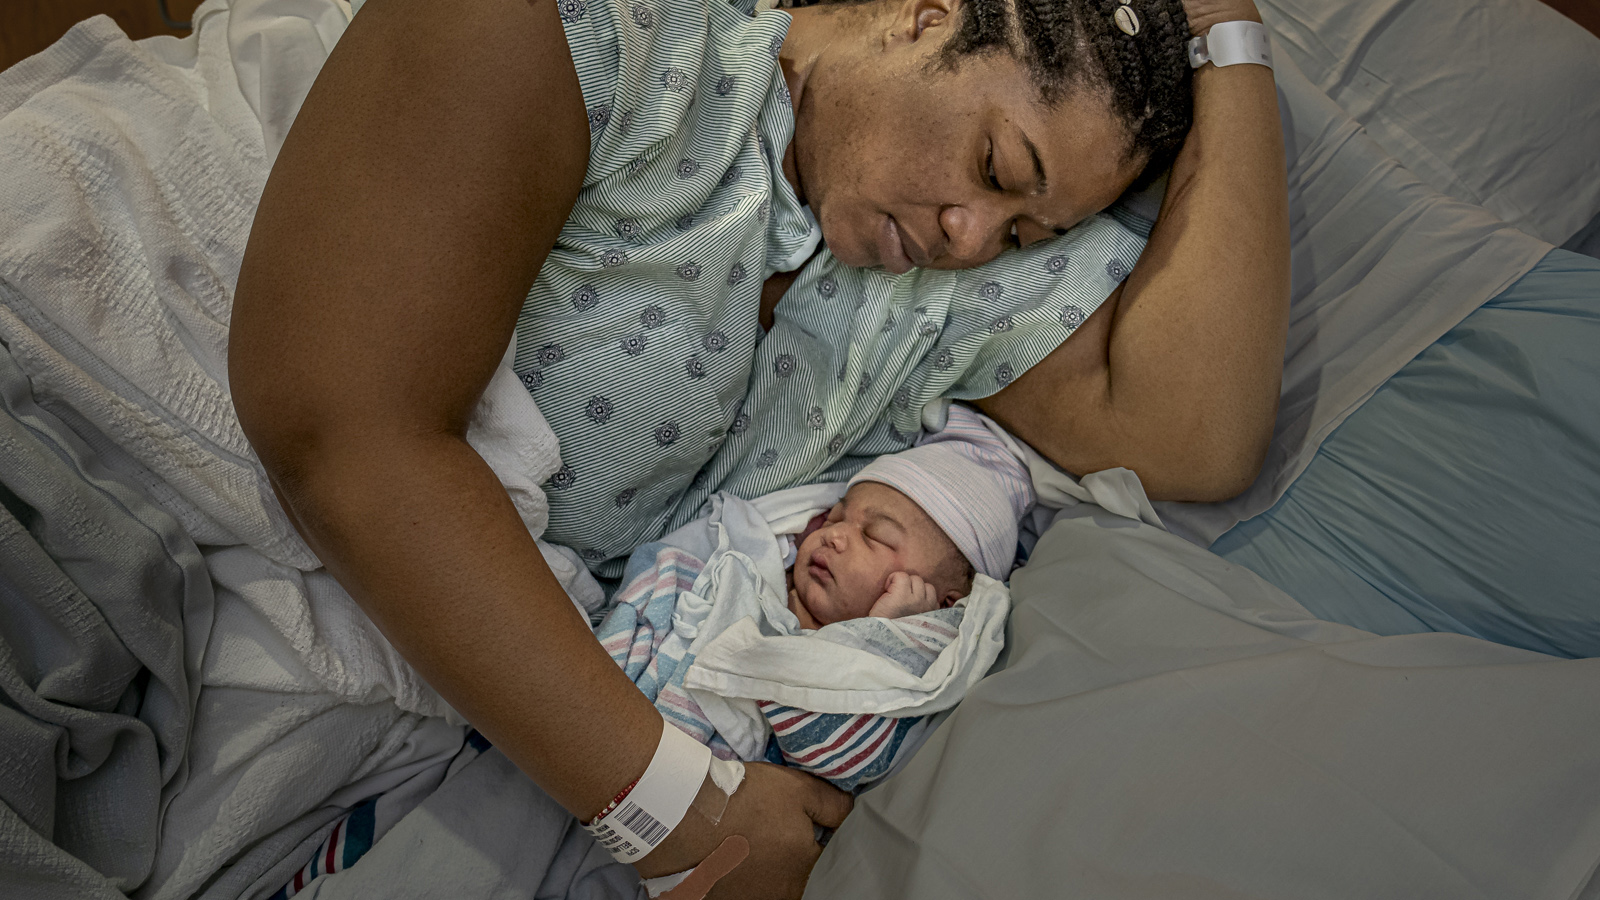 Erashea Bellany holds her daughter, Amenjah. Bellany, from Richmond, gave birth at her mother’s home in Hampton. After delivery, Erashea hemorrhaged and her midwife, Nicole Wardlaw, rushed her to the  Sentara CarePlex hospital in Hampton. Both mother and daughter are doing fine.